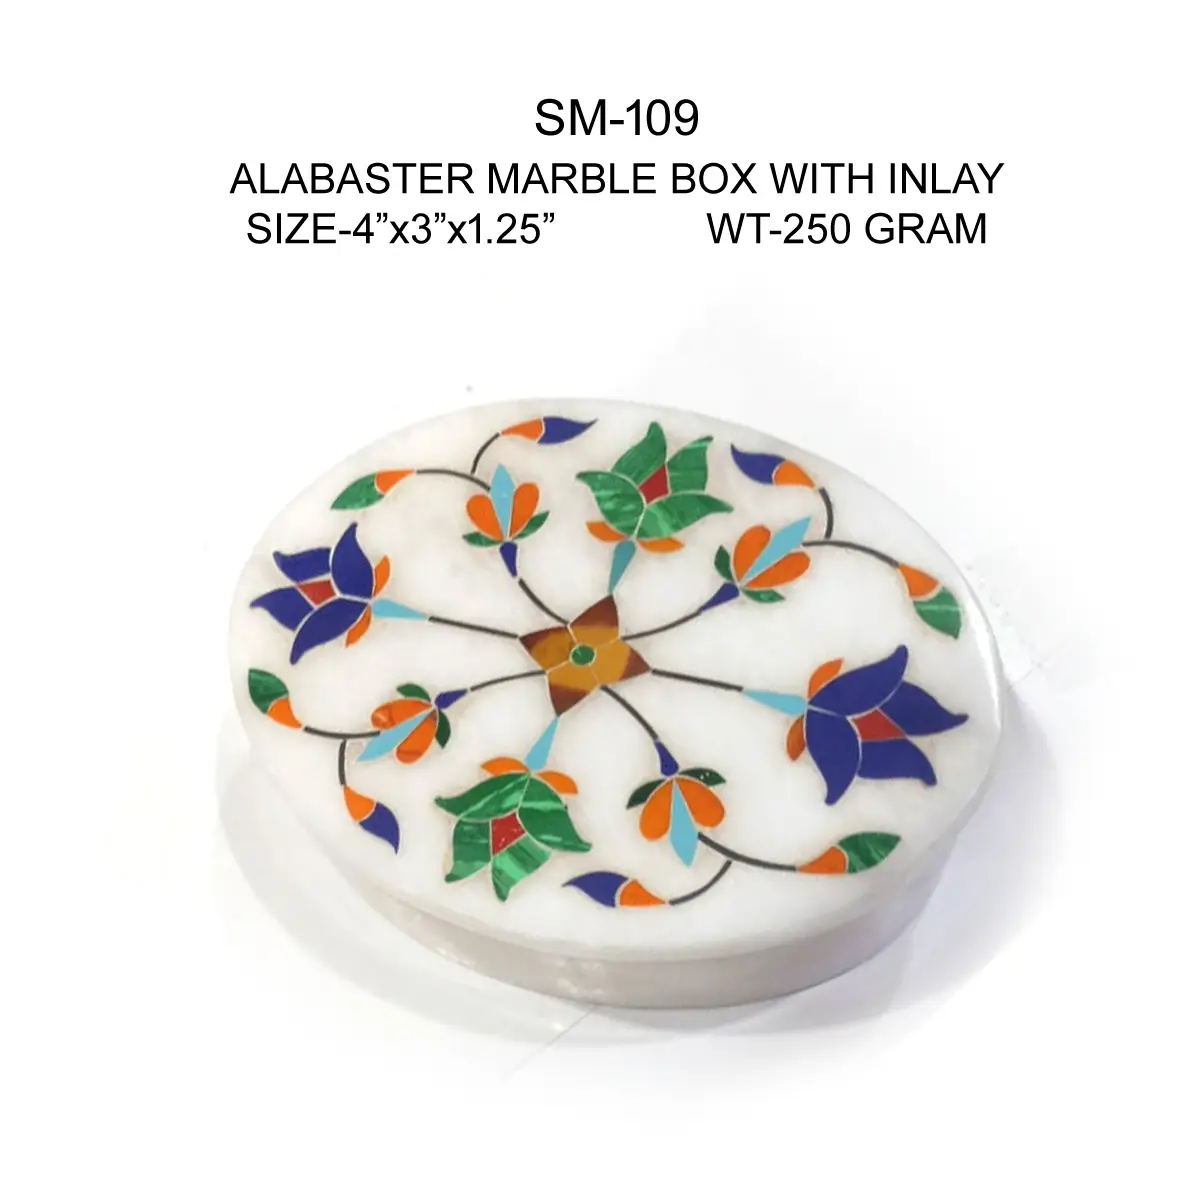 ALABASTER MARBLE BOX WITH INLAY